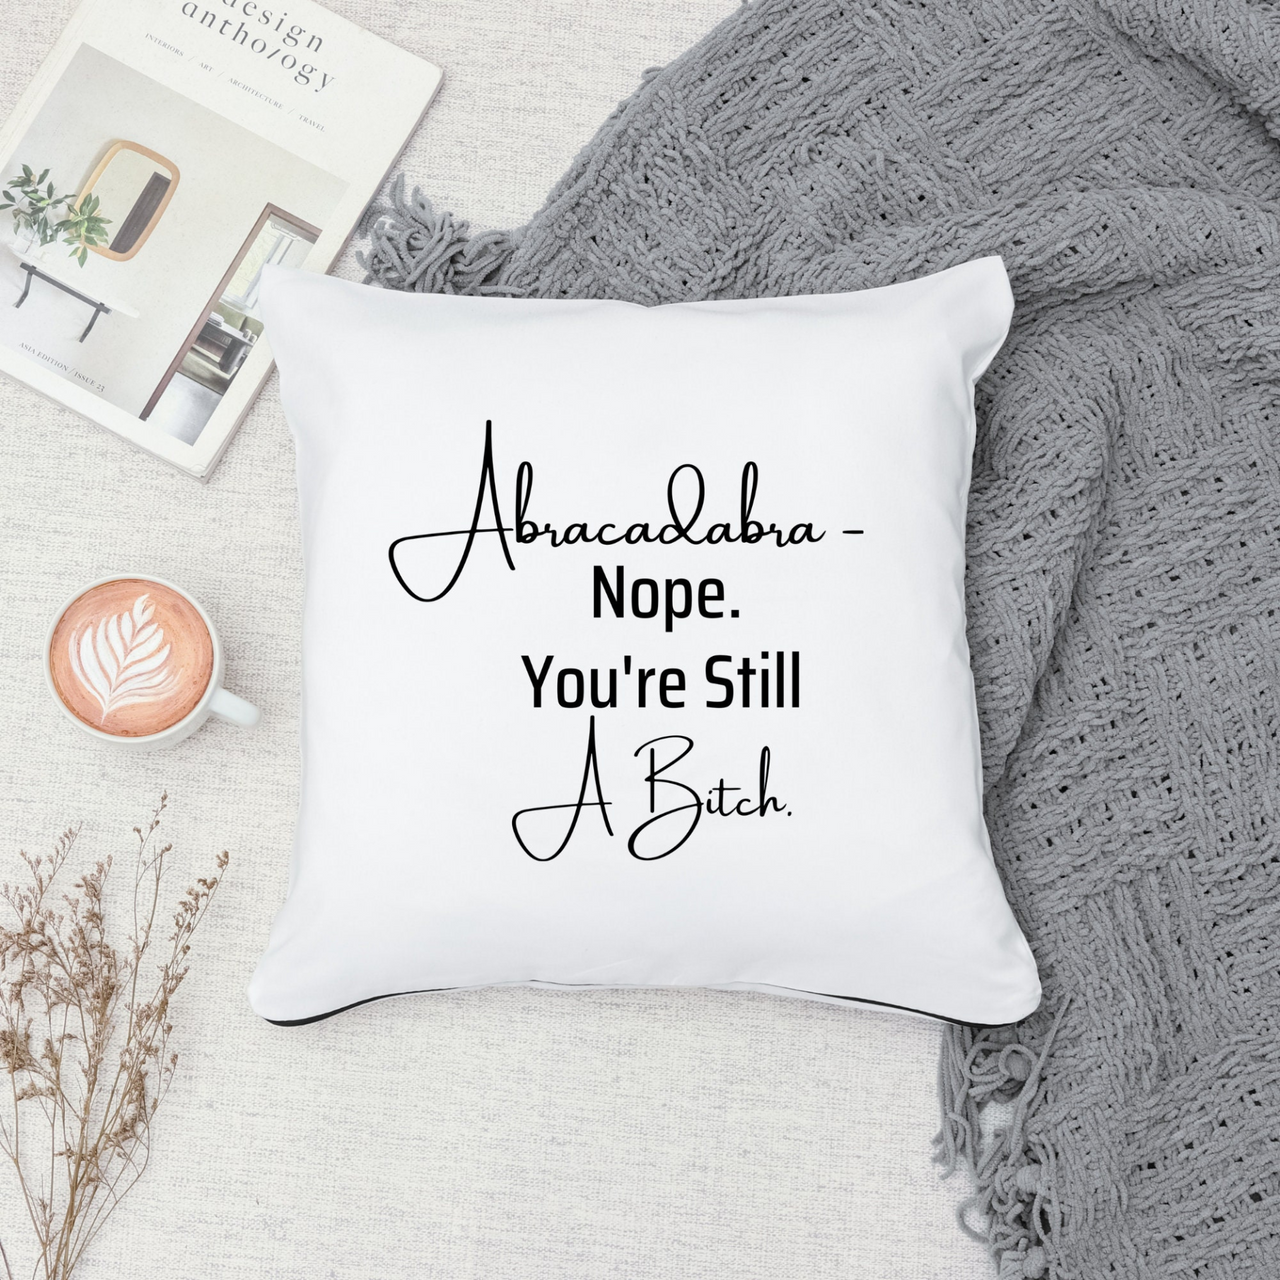 Abracadabra Nope You're Still A Bitch Couch Pillow Case | Funny Throw Pillow Cover with Sarcastic Quote | Decorative Pillow For Housewarming